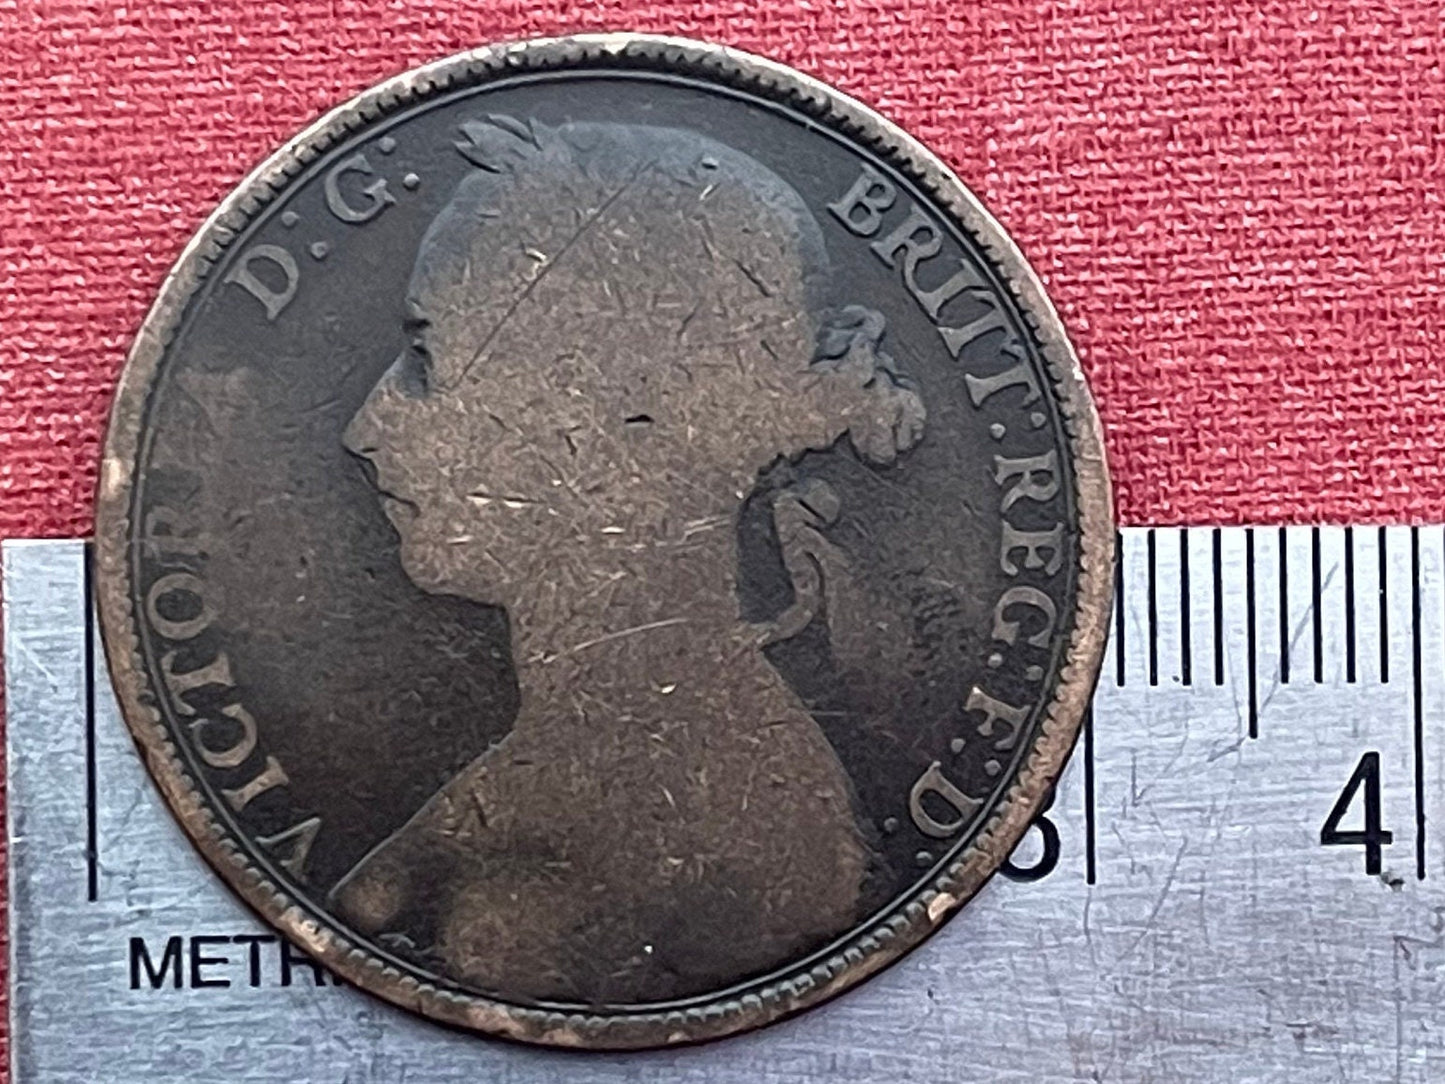 Queen Victoria (2nd Portrait) & Britannia with Trident 1 Penny Great Britain Authentic Coin Money for Jewelry (Bun Head) CONDITION: FAIR